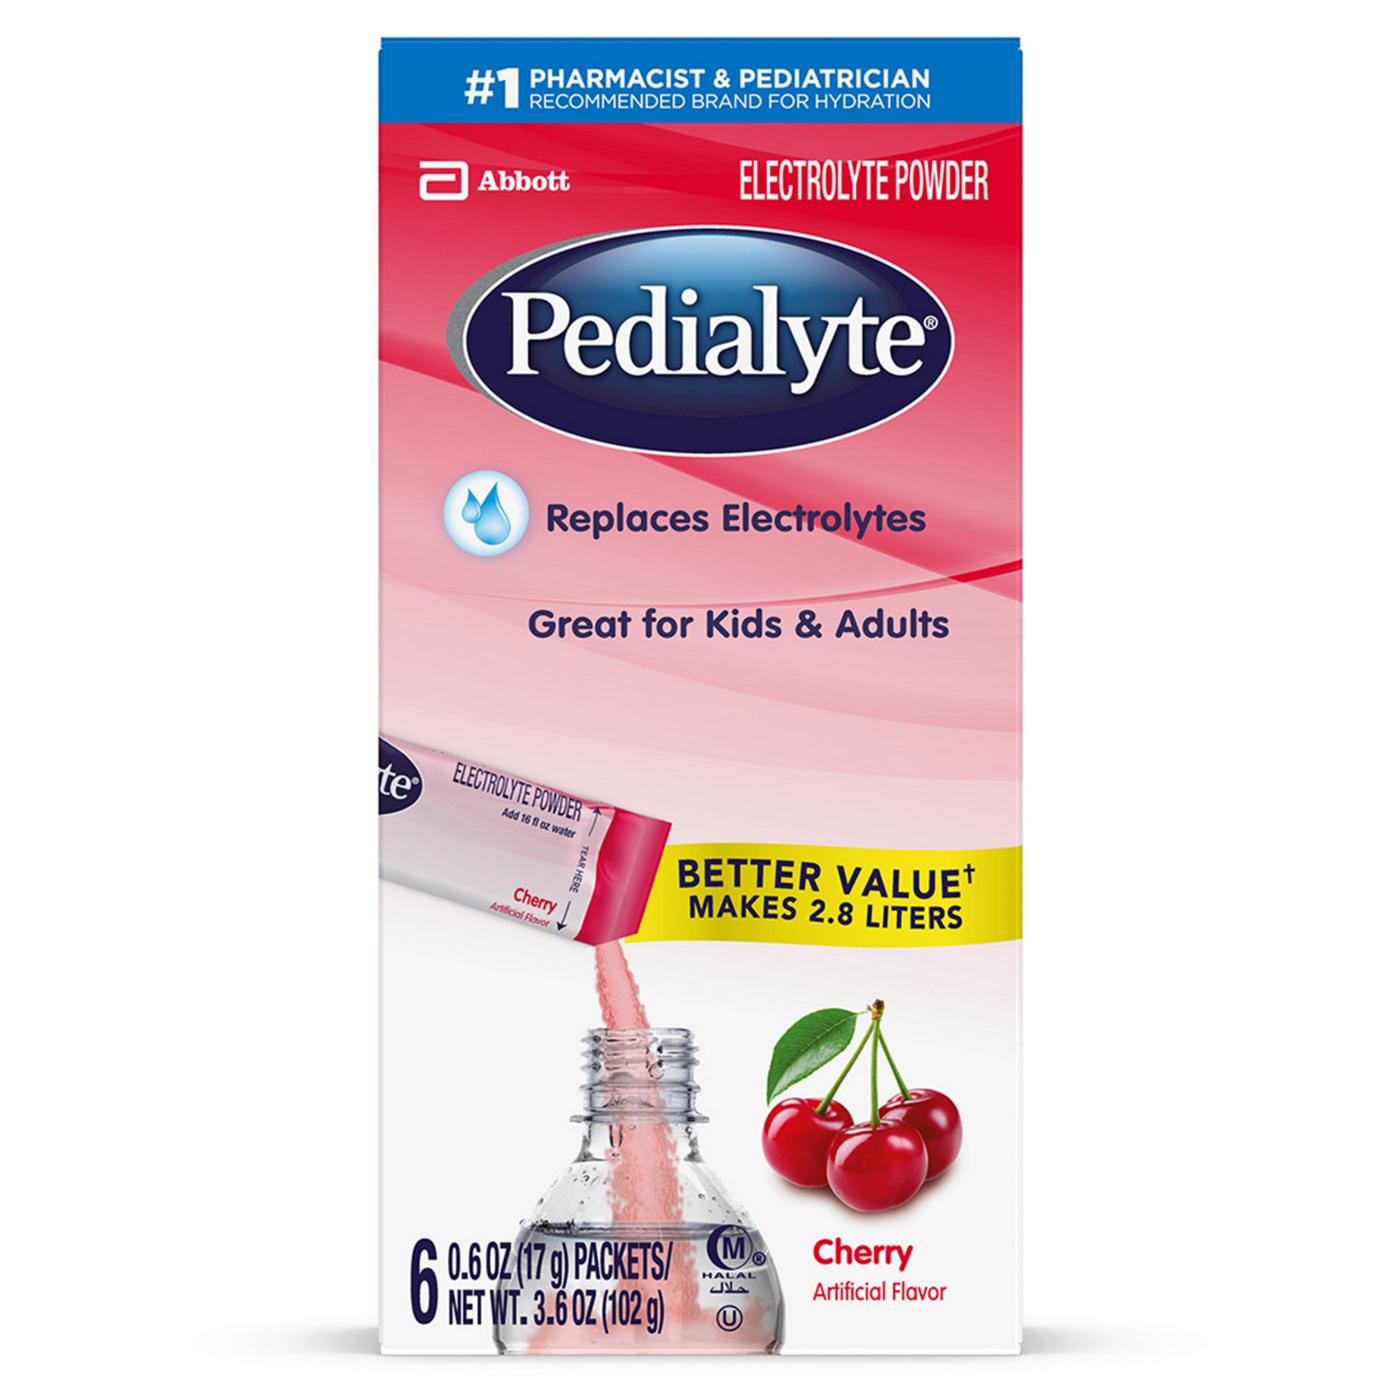 Pedialyte Electrolyte Powder Packets - Cherry; image 1 of 7